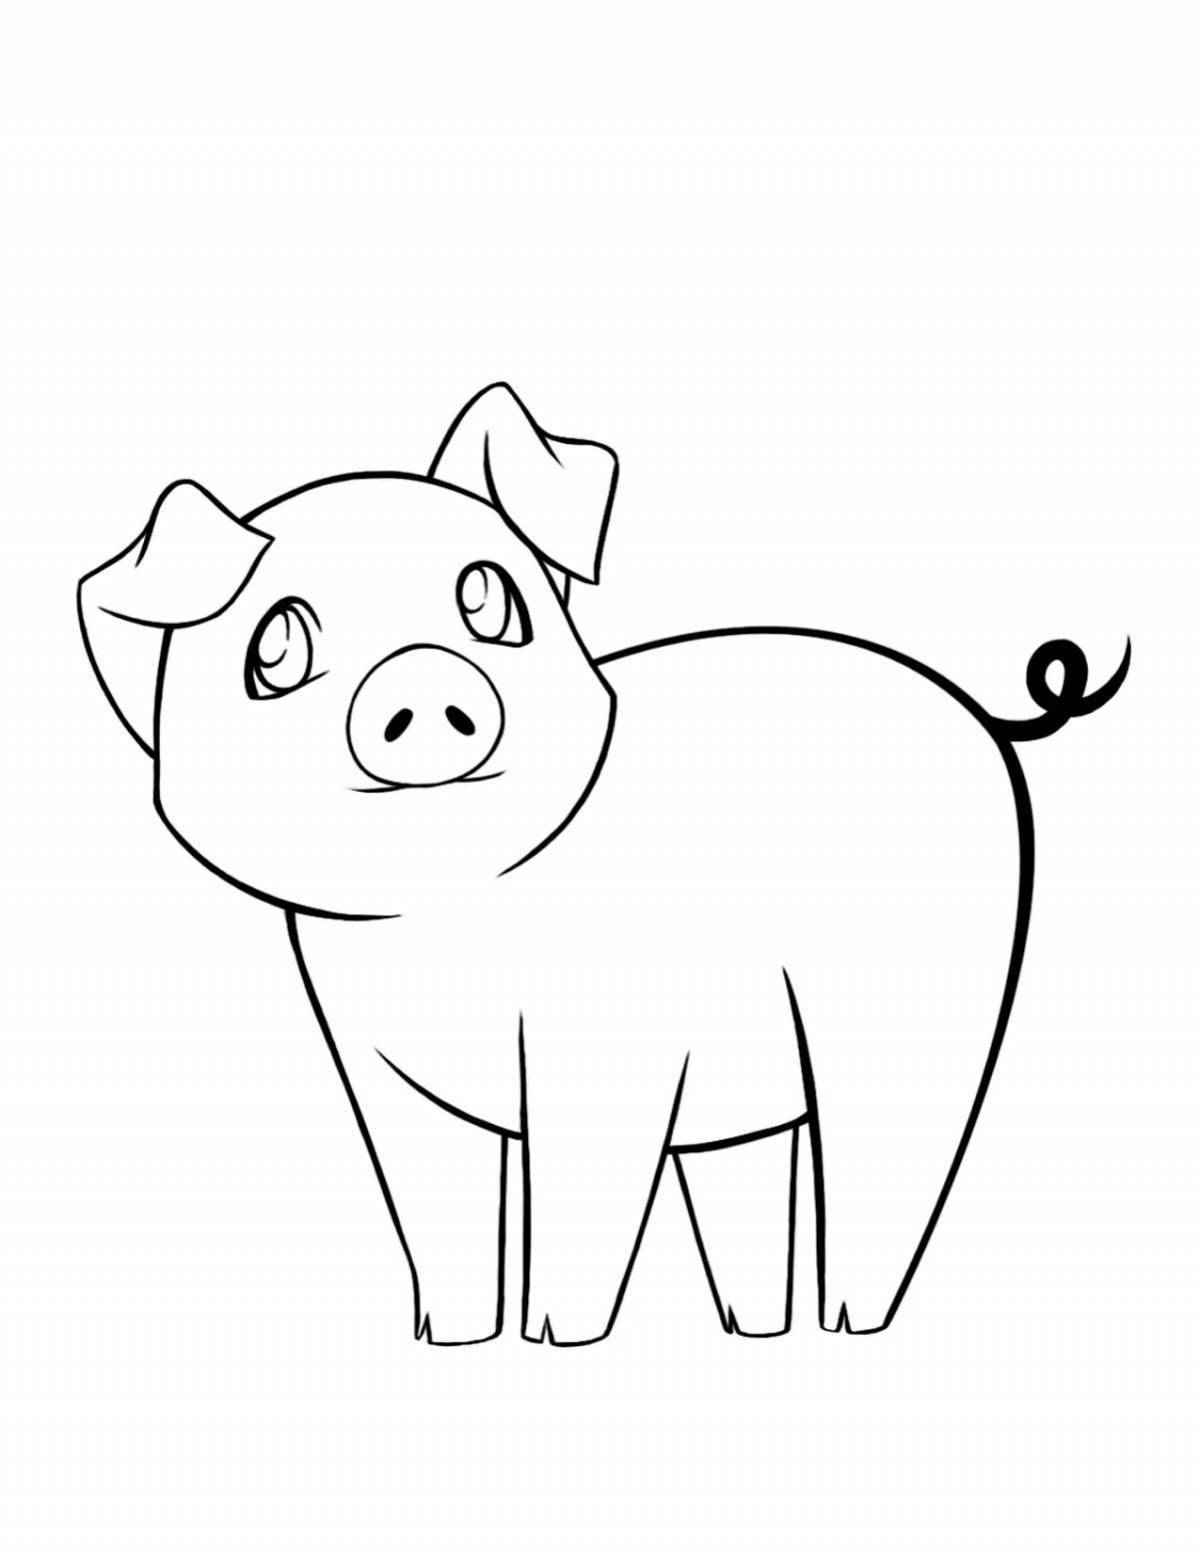 Coloring page happy mini pig